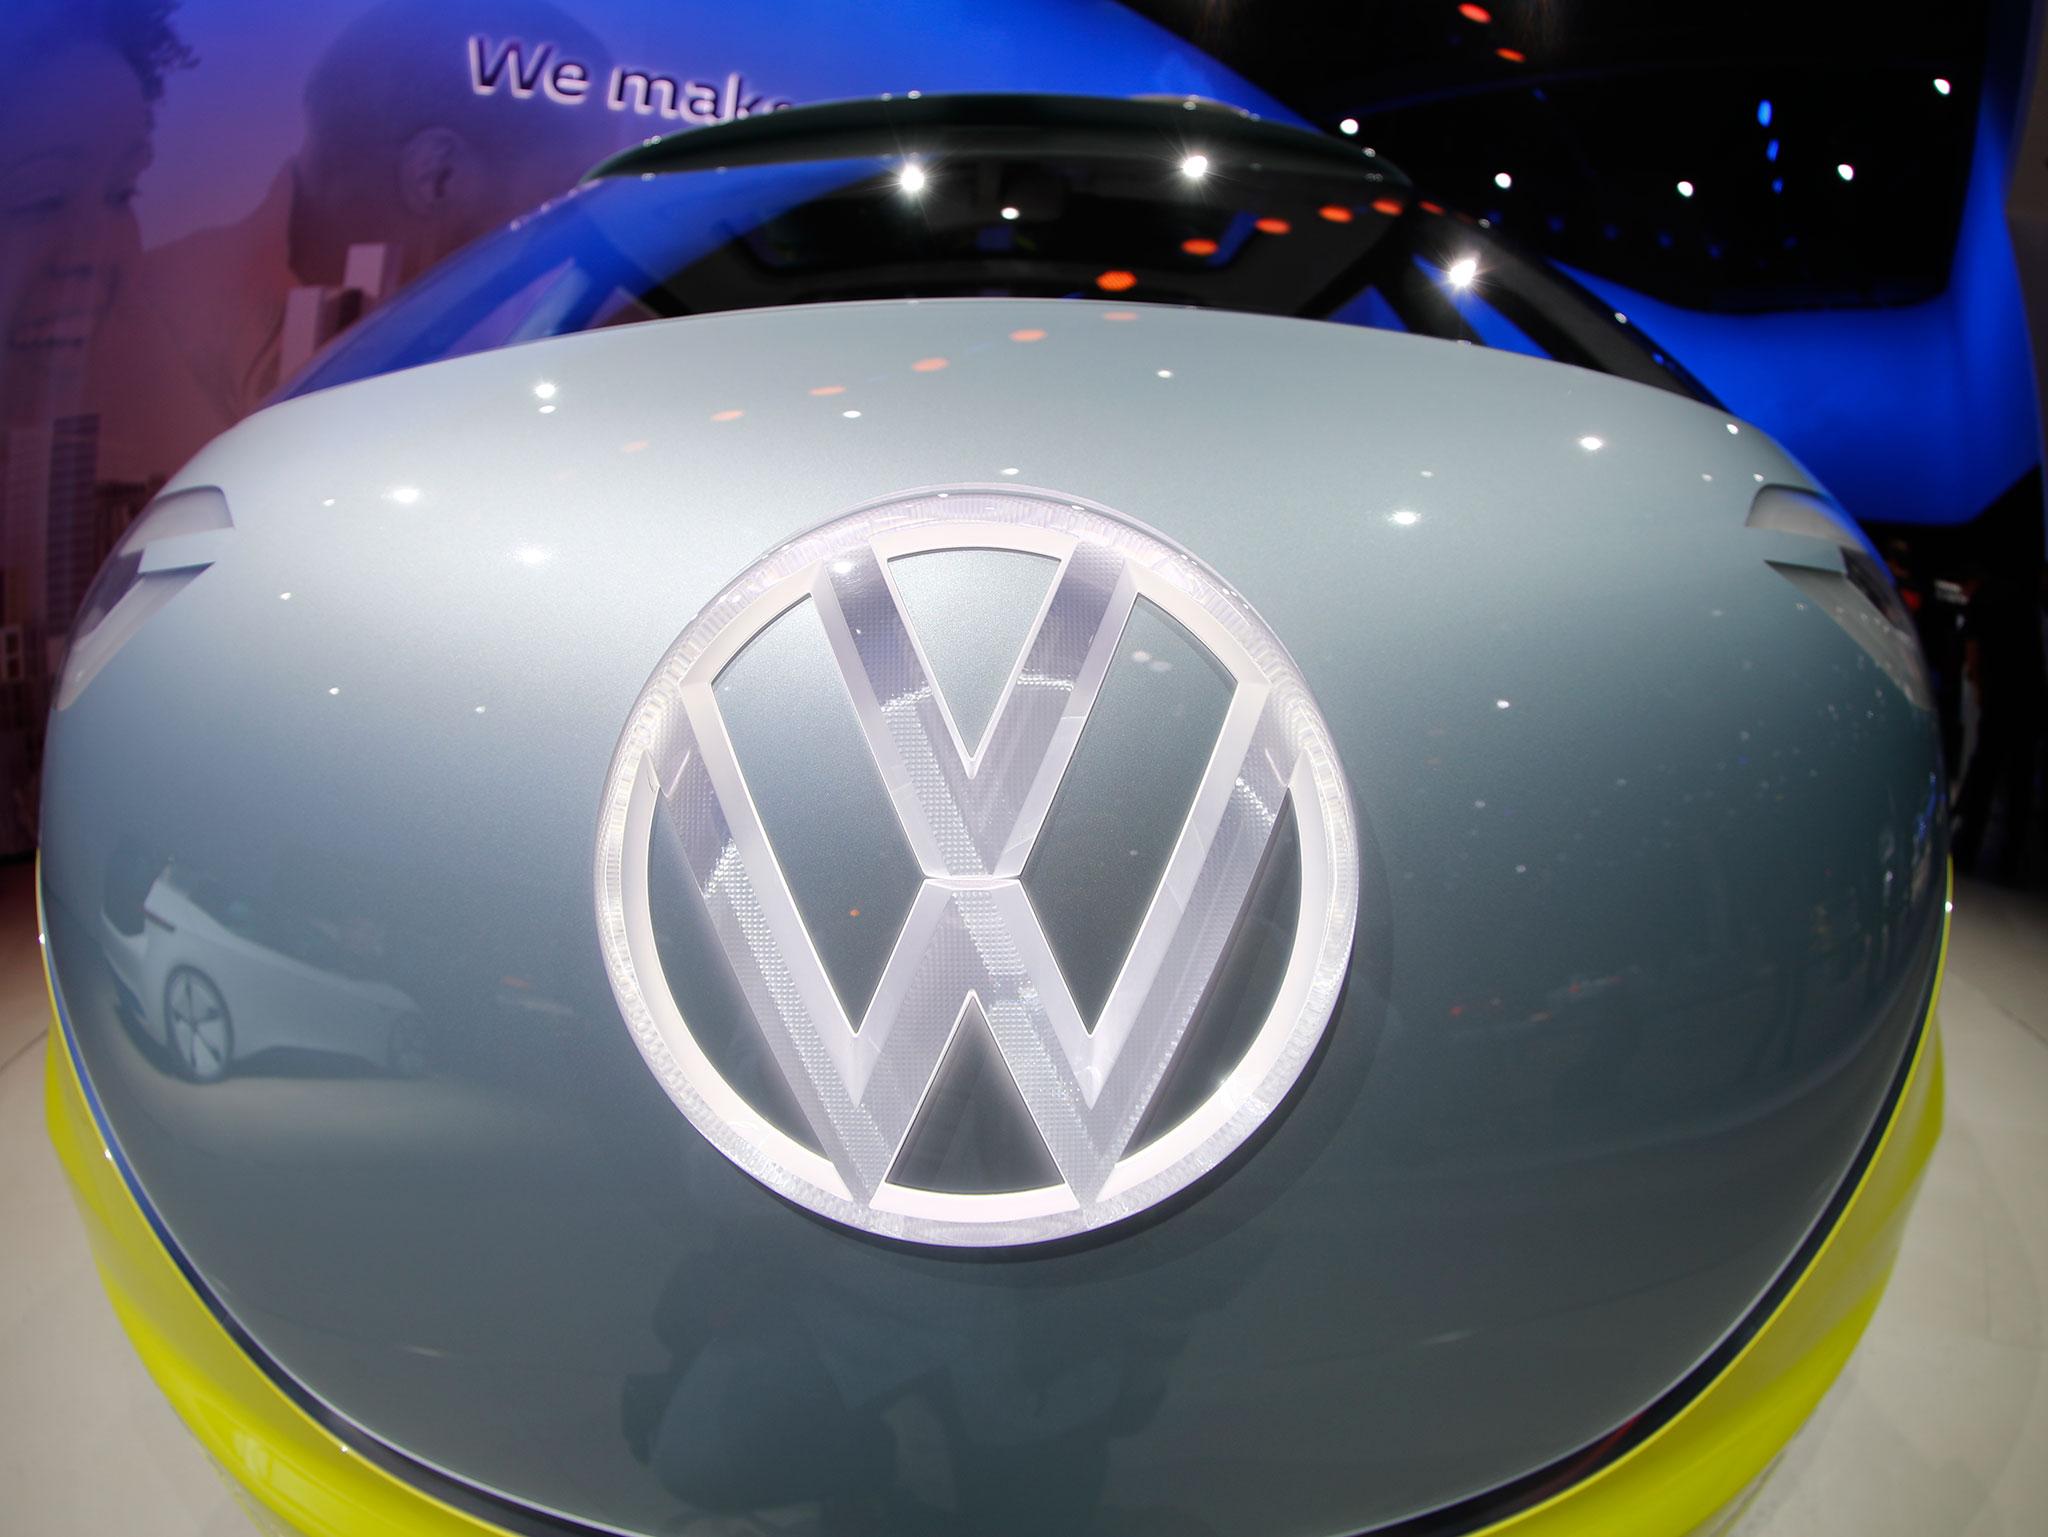 will VW introduce more than 10 fully or partly battery-powered cars in China by 2020